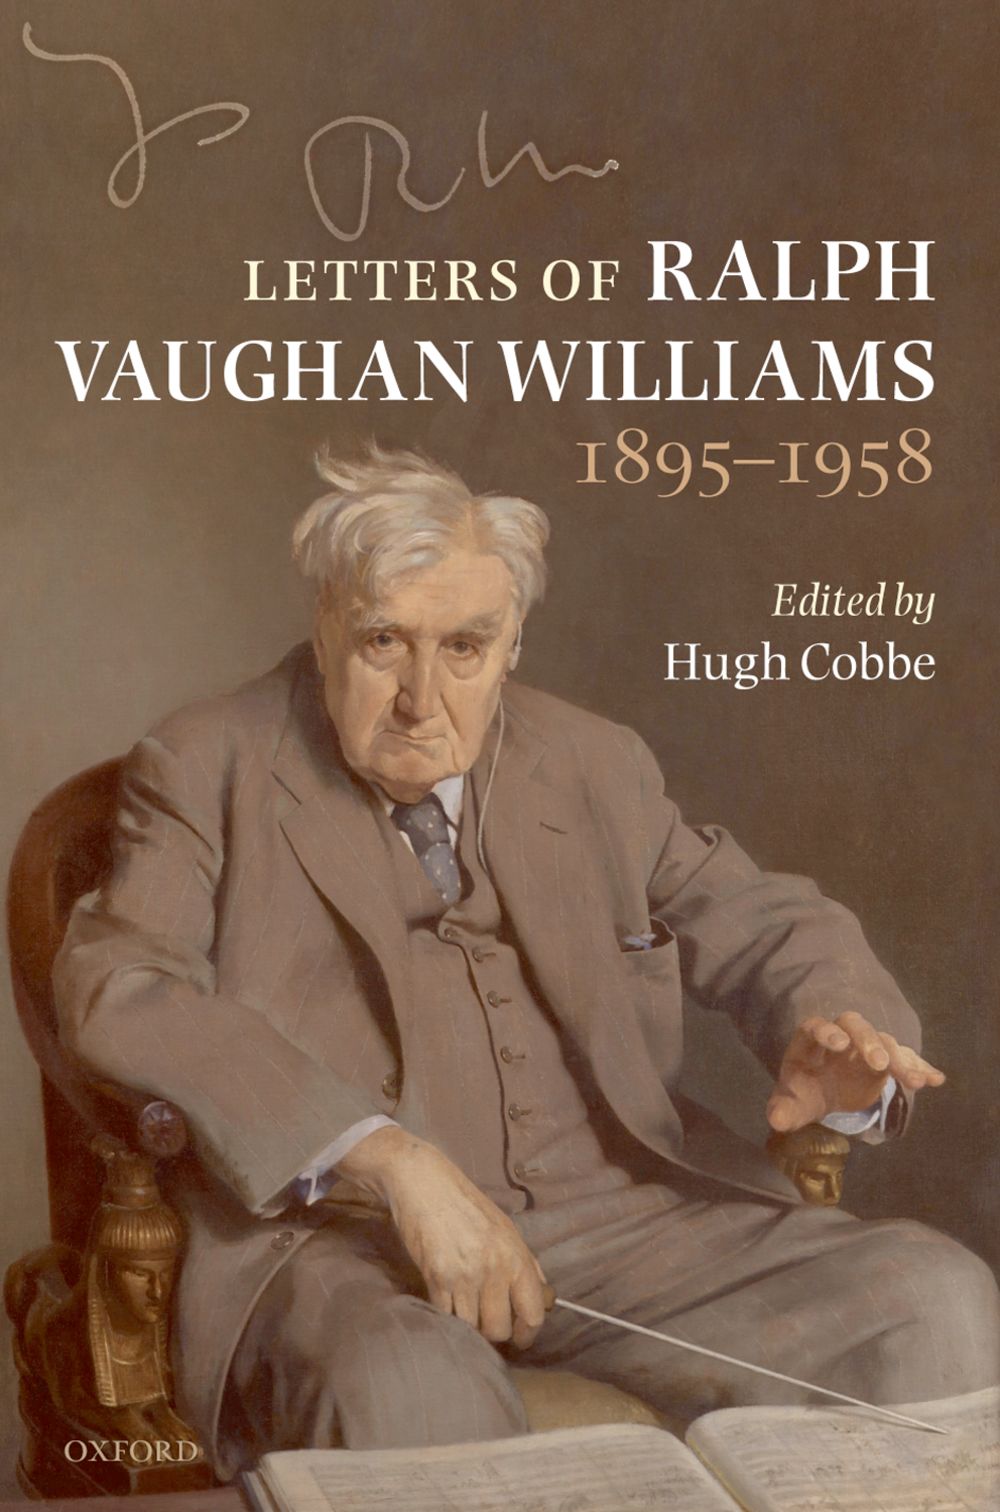 Letters of Ralph Vaughan Williams  1895-1958